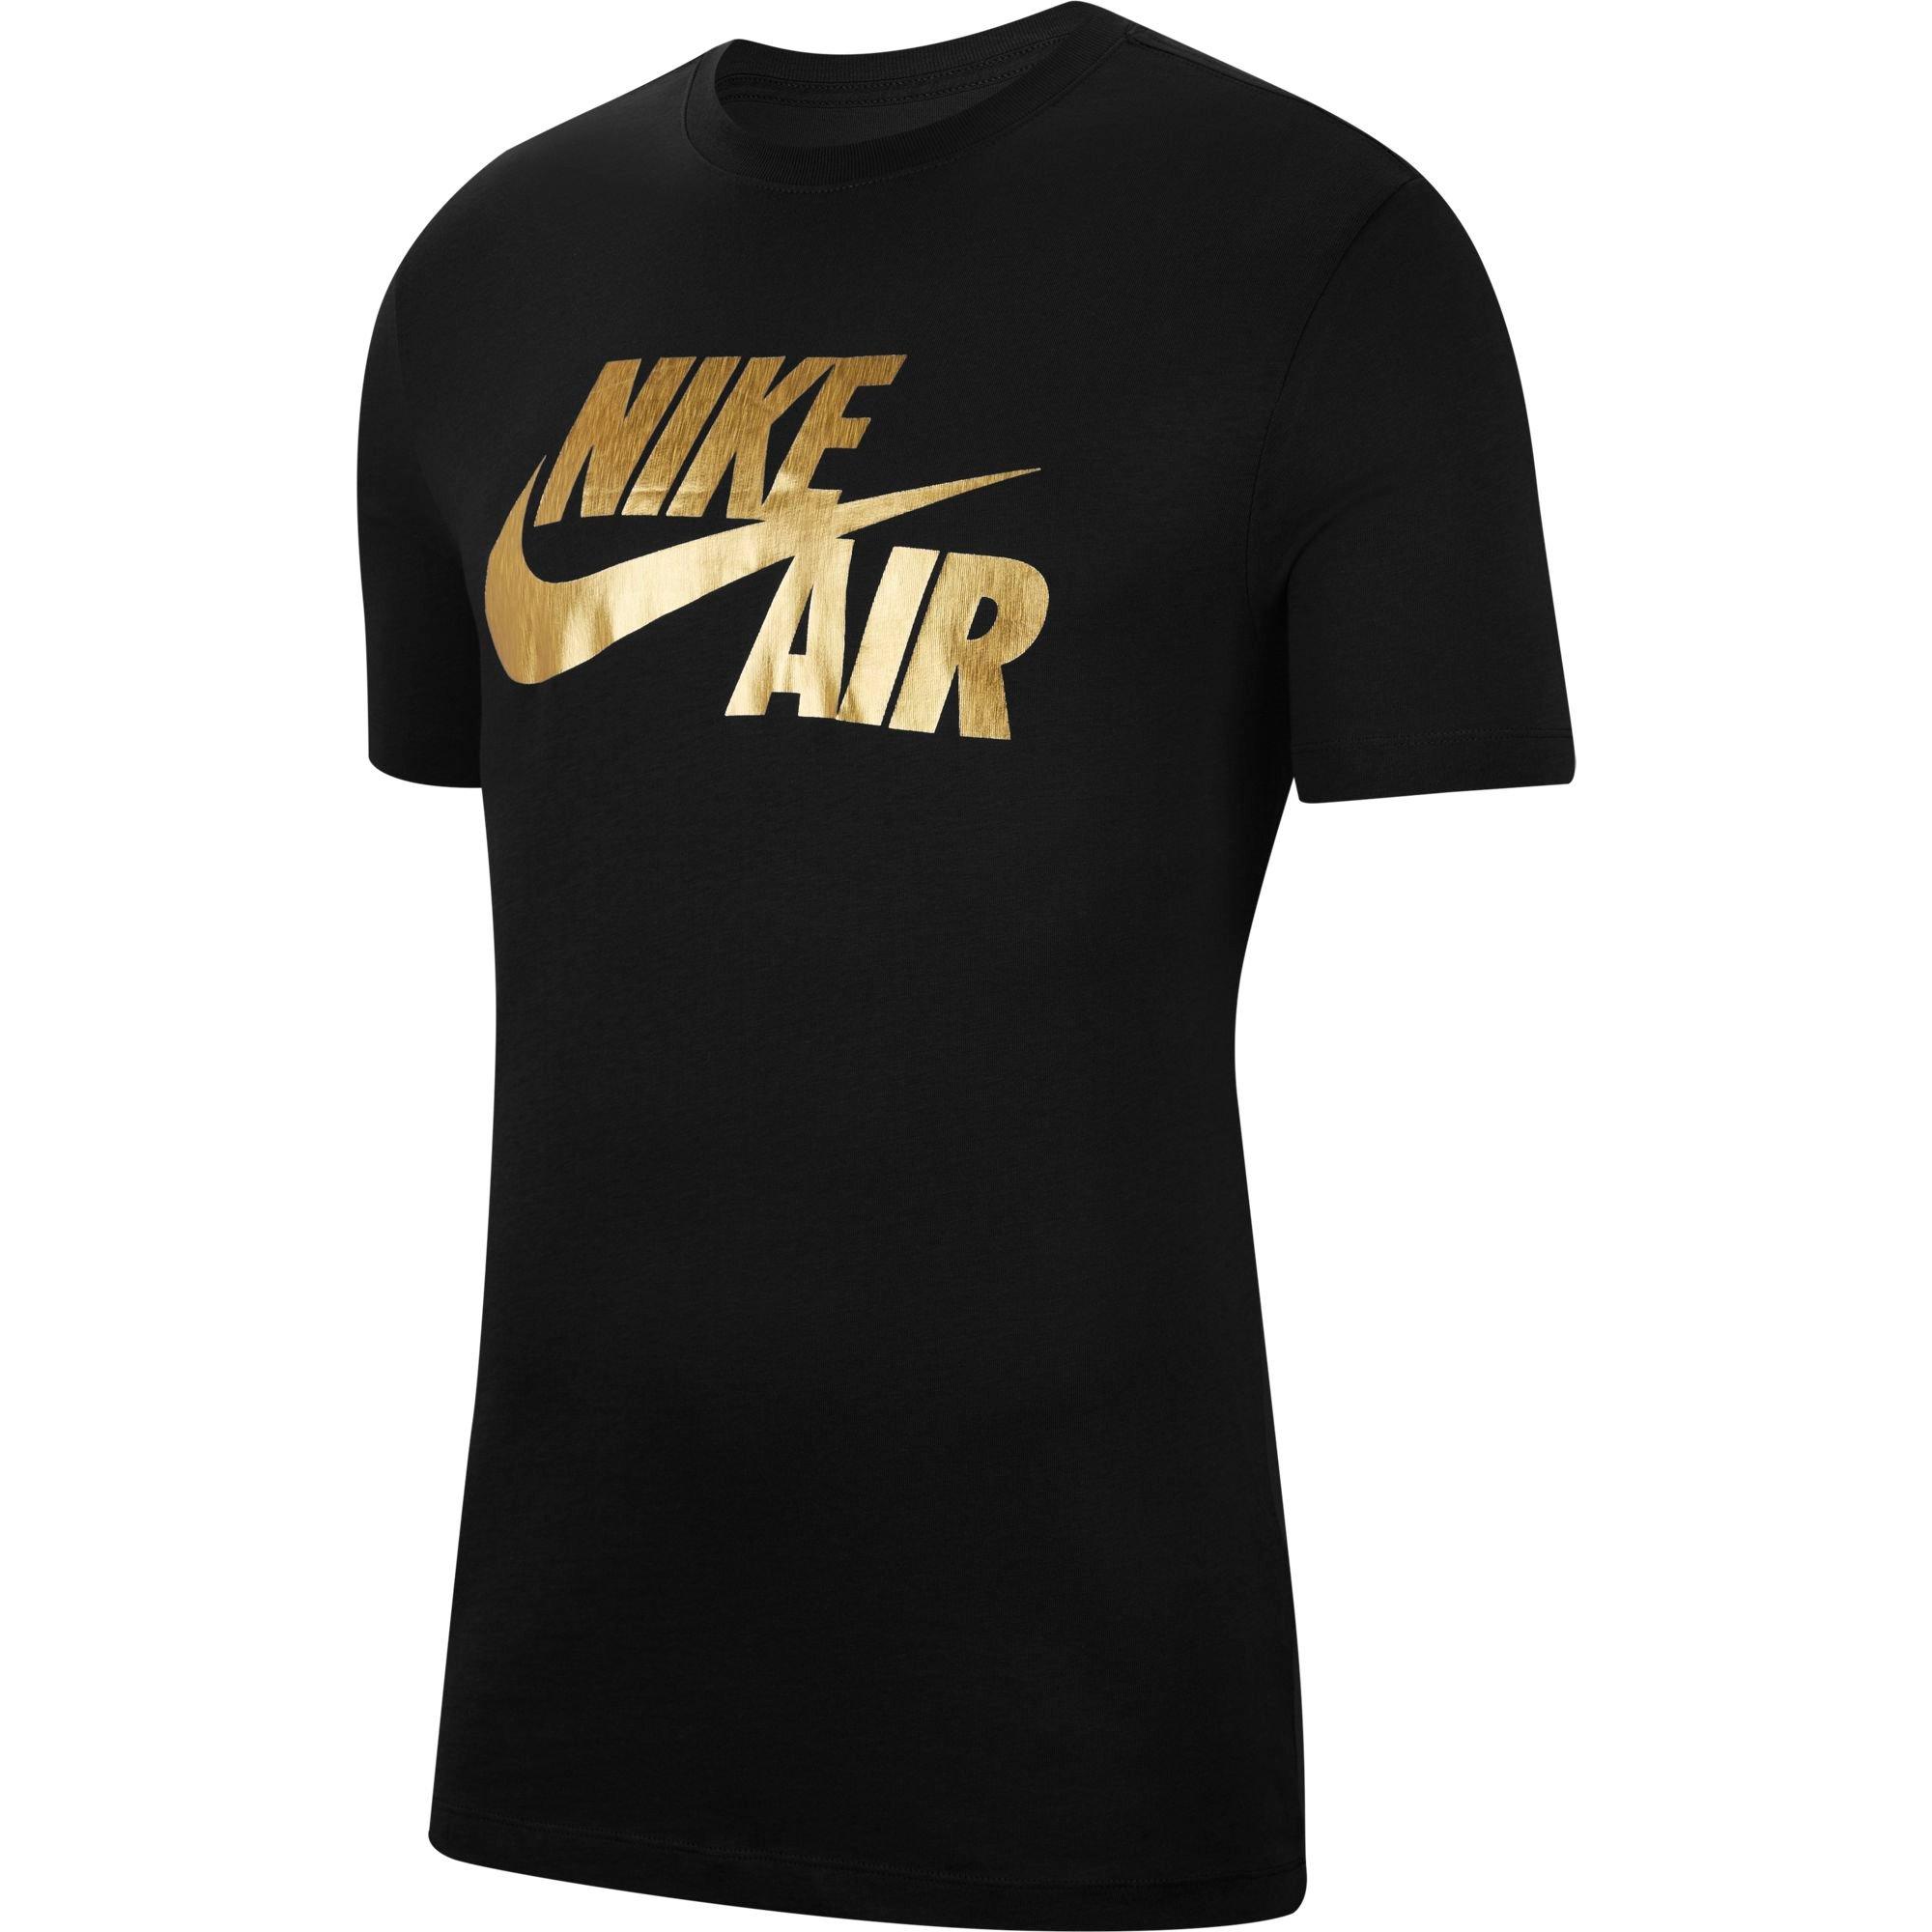 nike shirt with gold letters